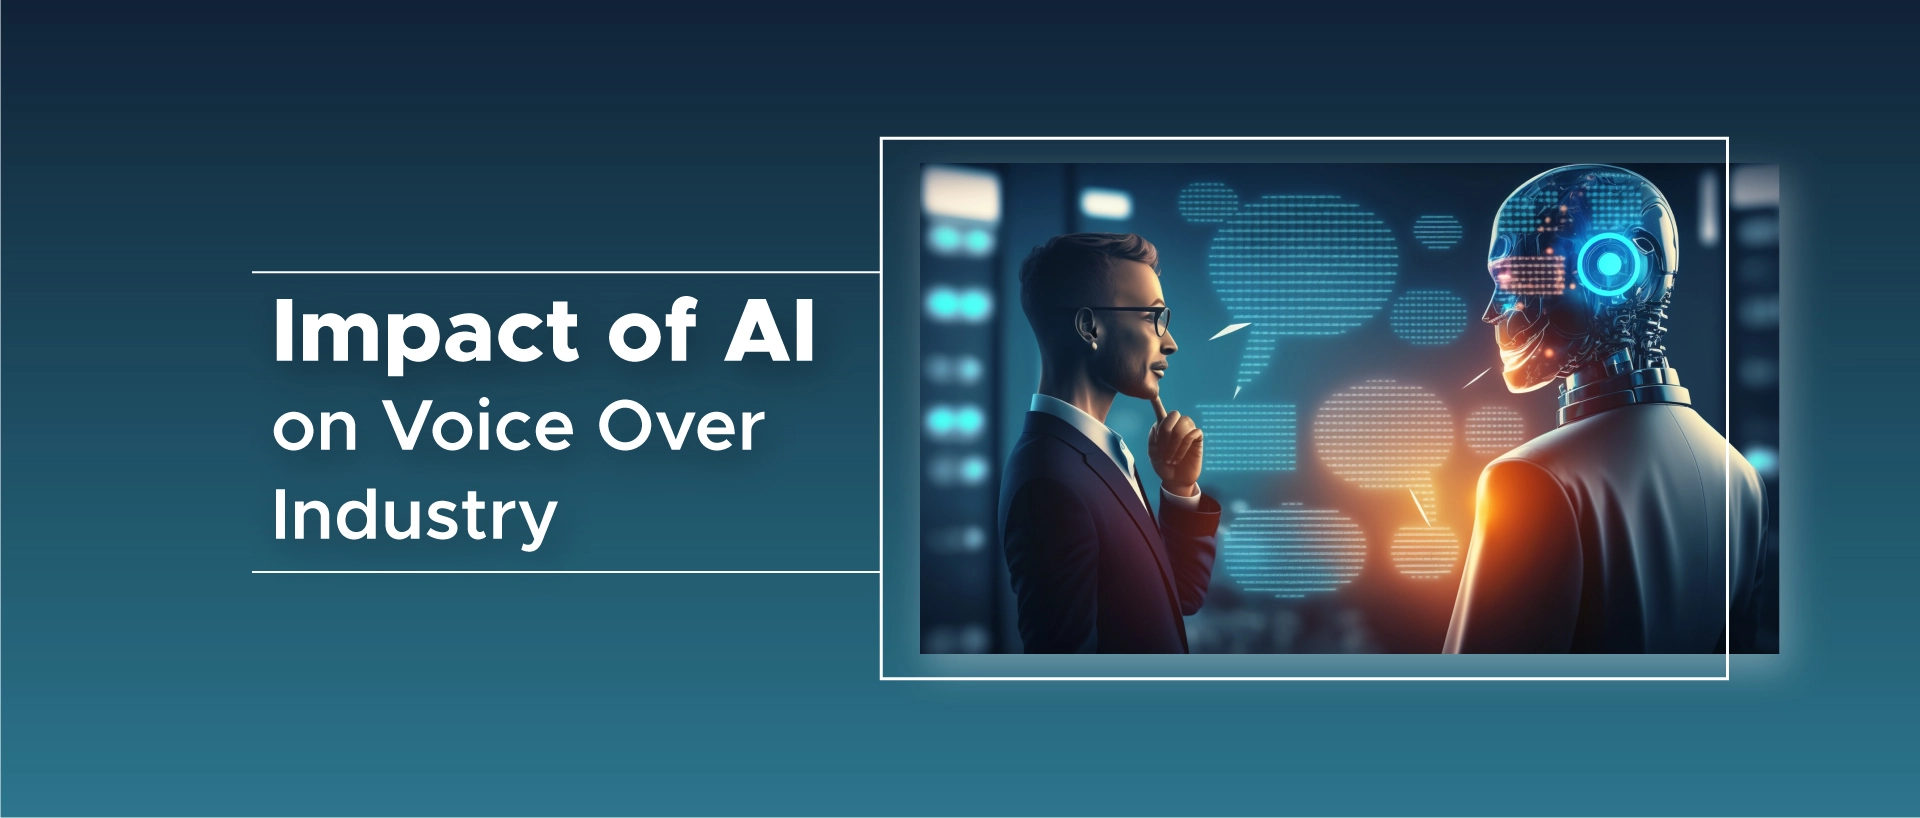 AI Voice Over & Its Impact on Voice Over Industry